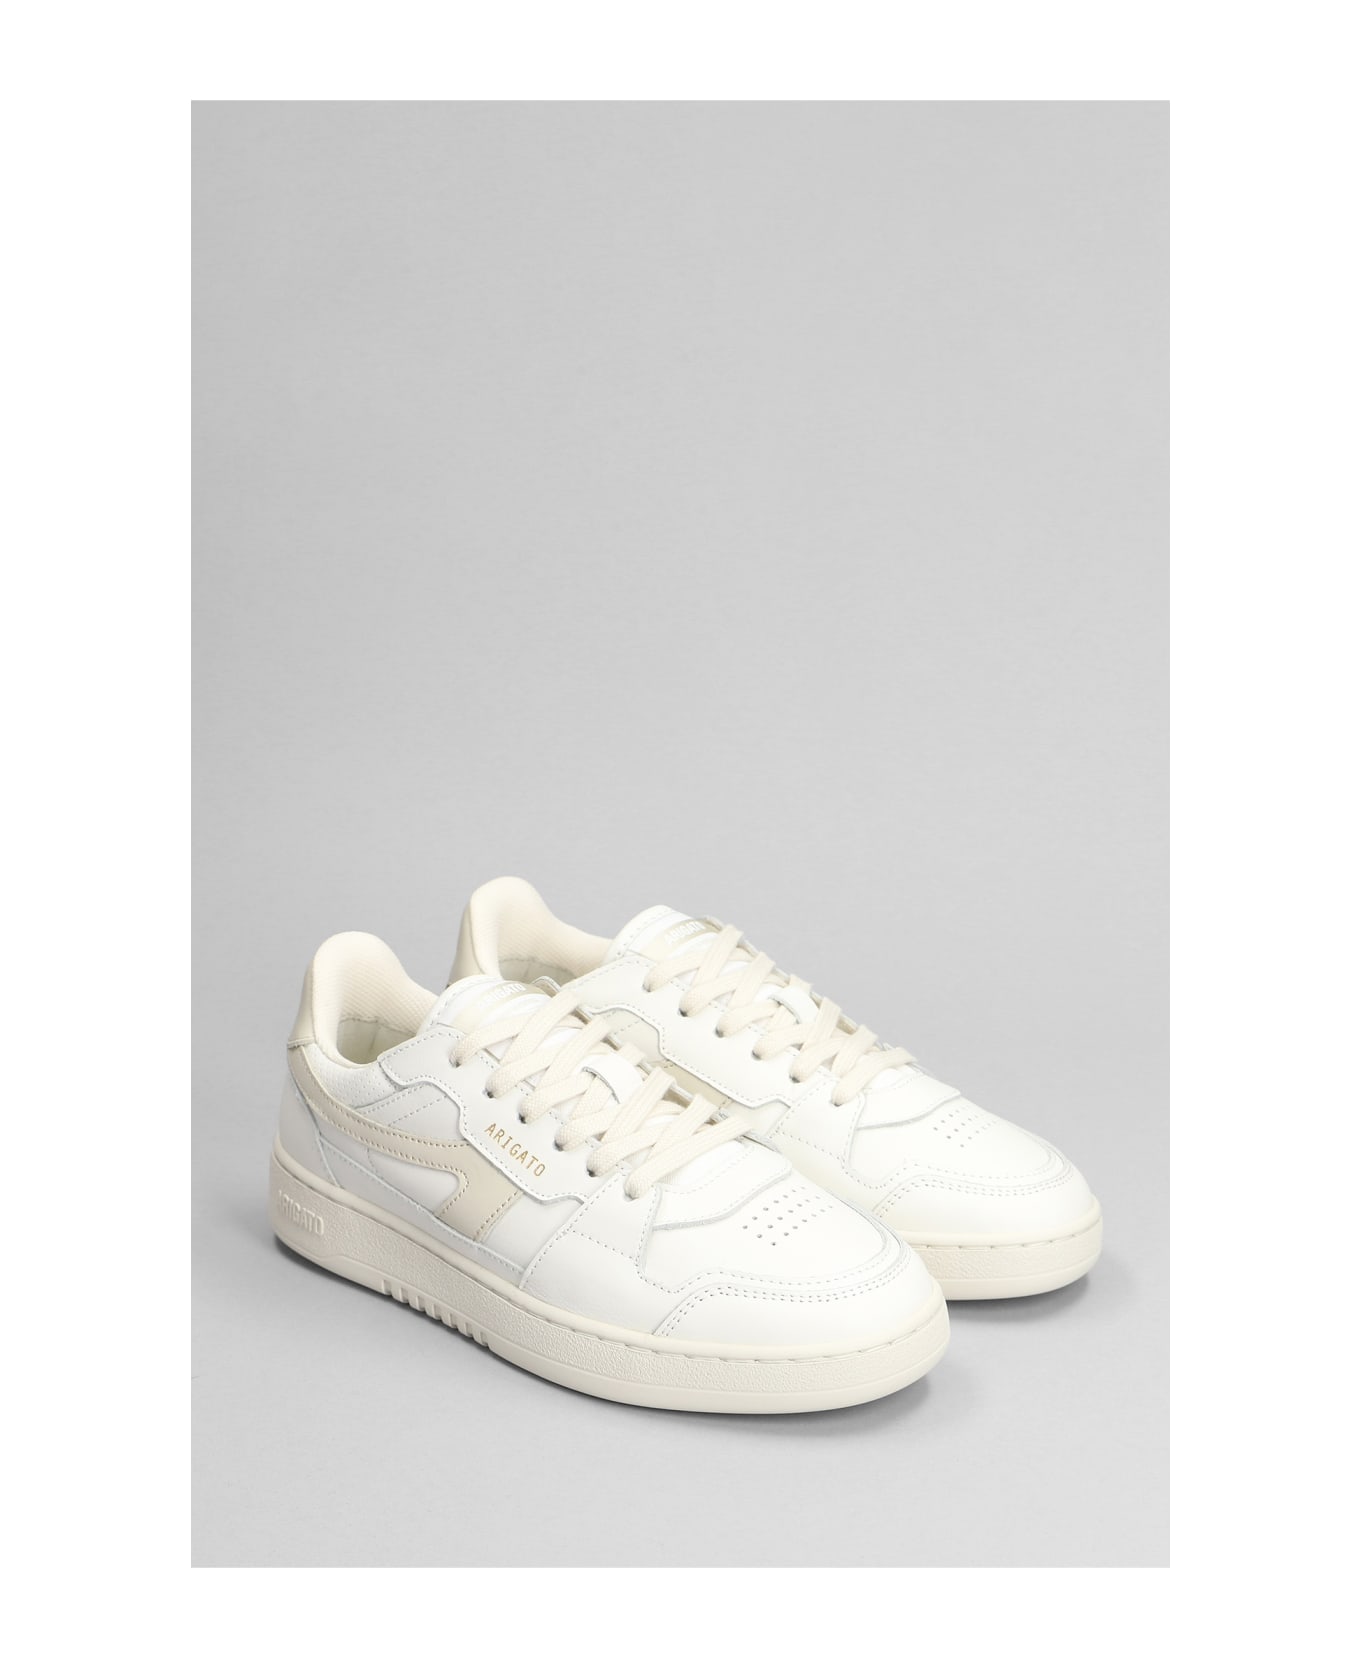 Axel Arigato Dice-a Sneaker Sneakers In White Leather - white スニーカー